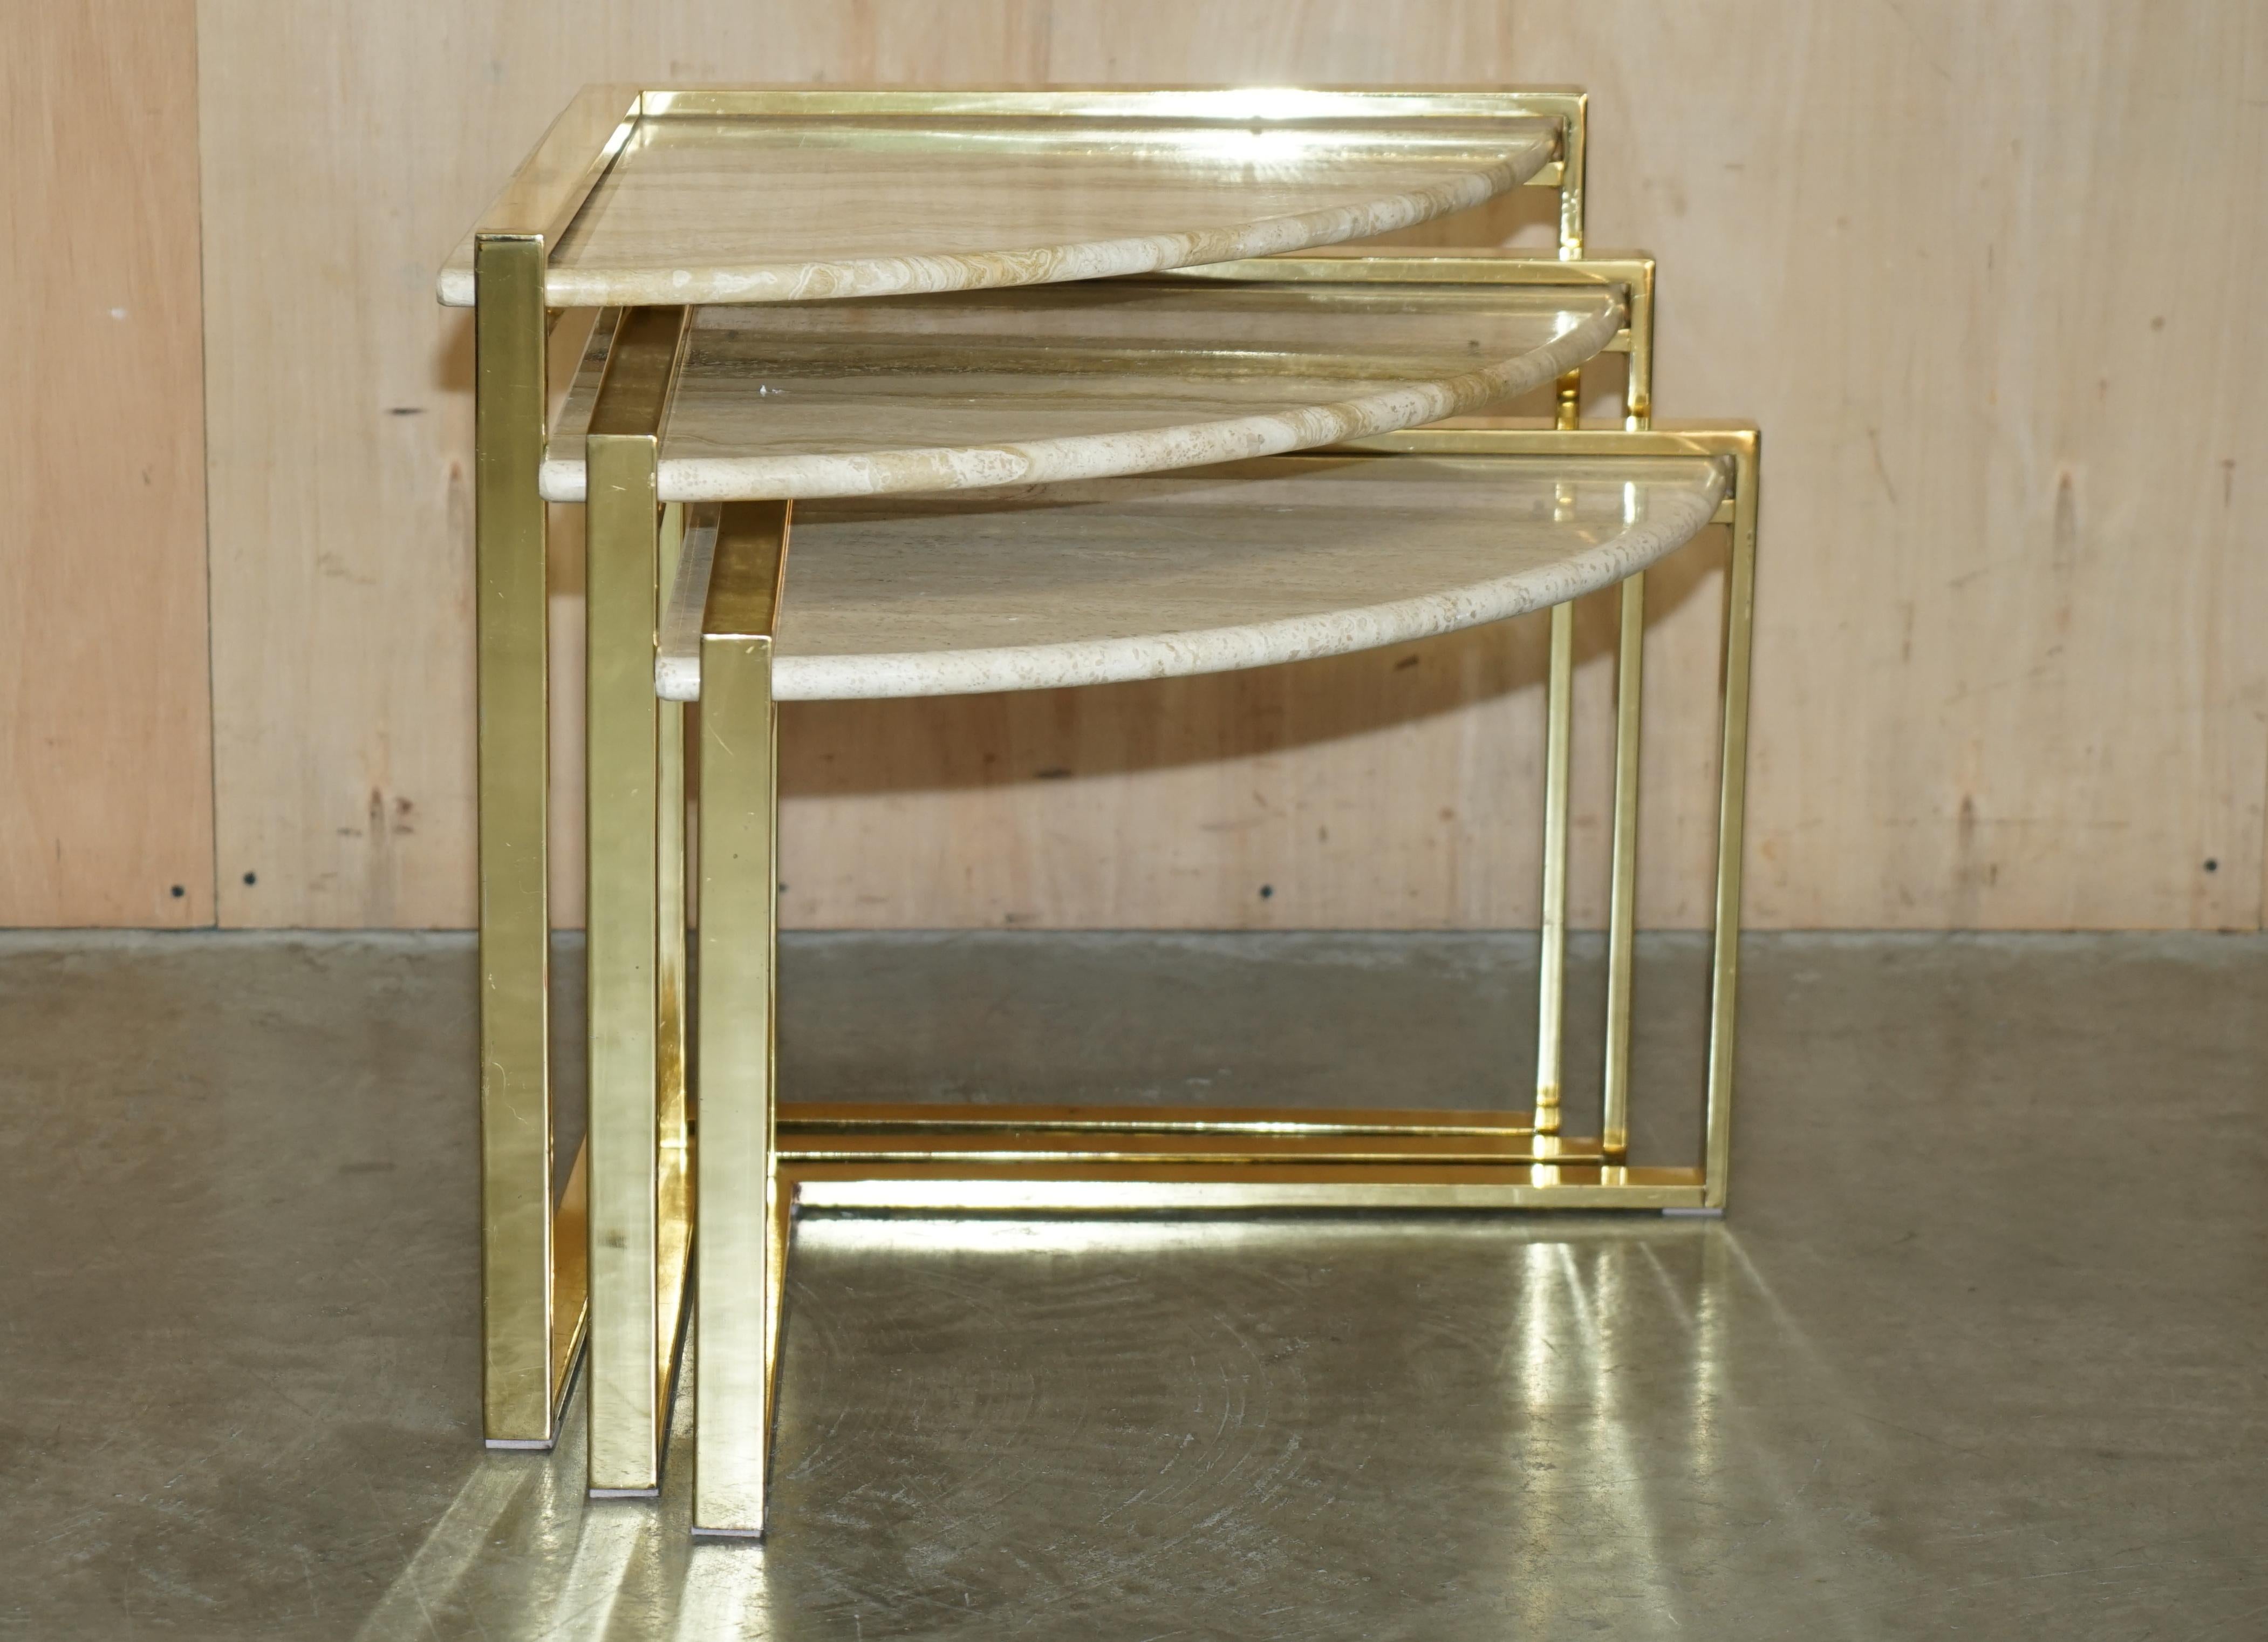 Royal House Antiques

Royal House Antiques is delighted to offer for sale this stylish vintage brass and marble nest of three corner tables

Please note the delivery fee listed is just a guide, it covers within the M25 only for the UK and local